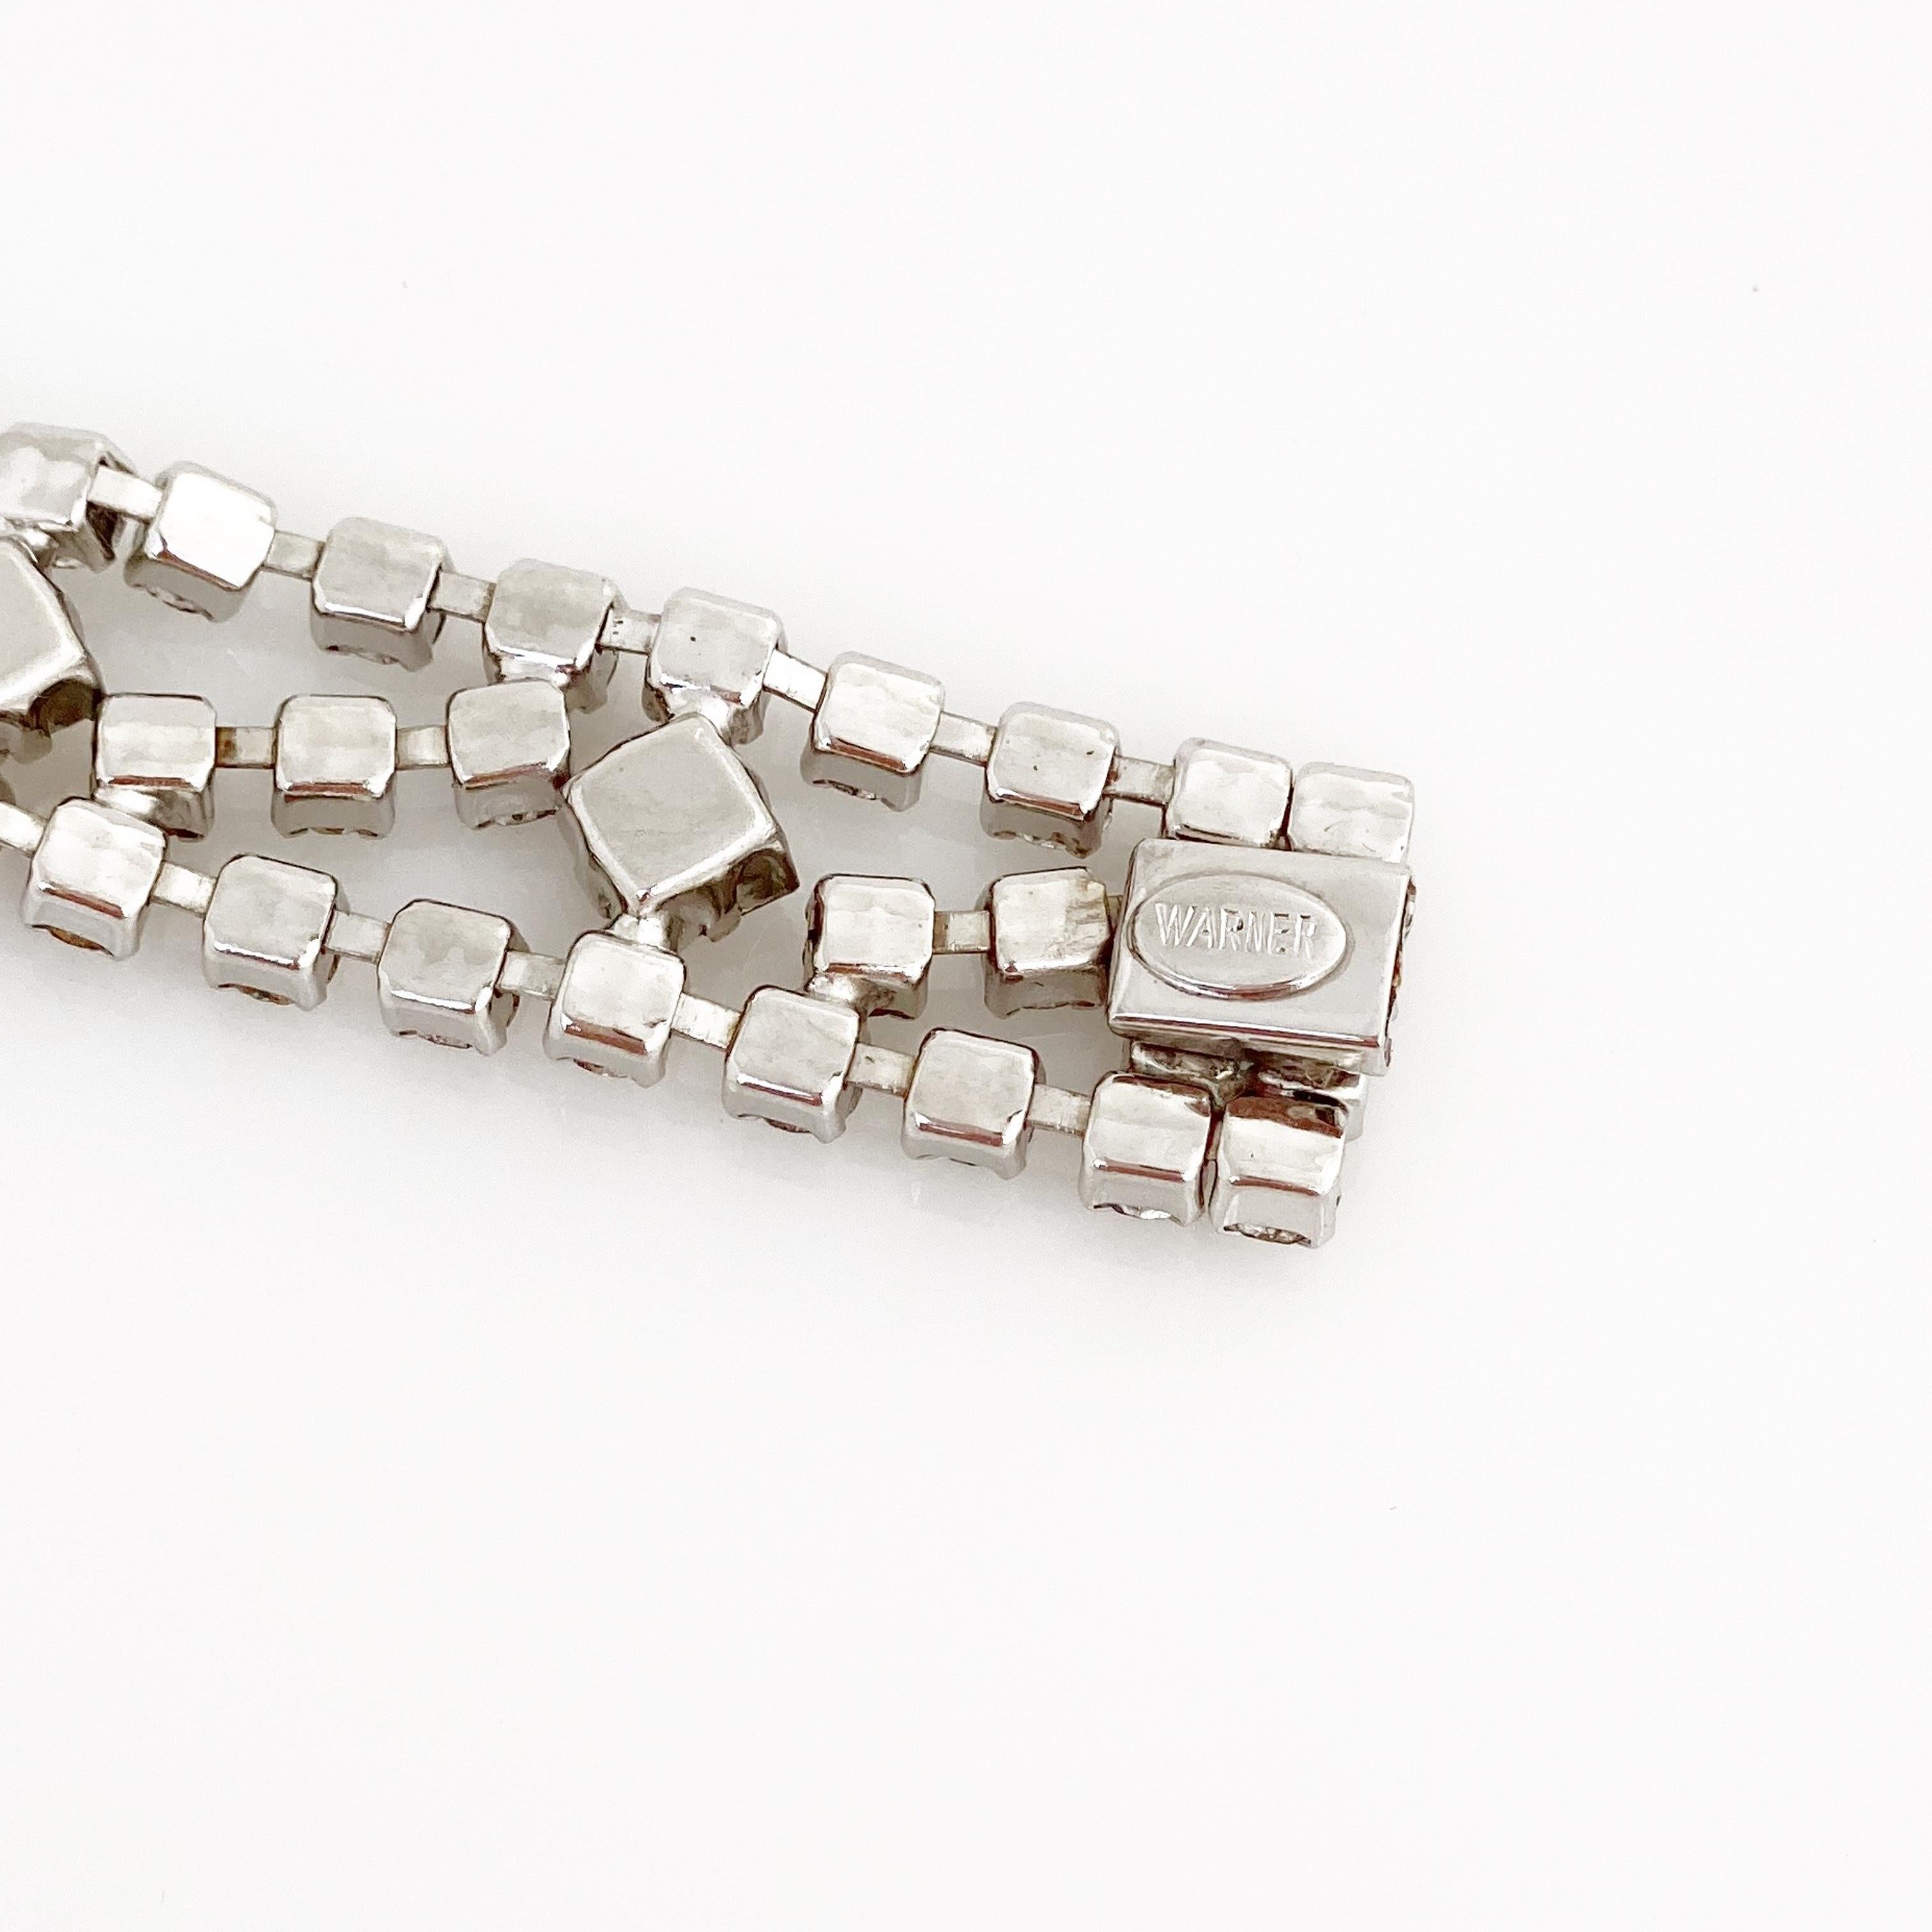 Women's Square Cut Crystal Rhinestone Cocktail Bracelet By Warner, 1950s For Sale